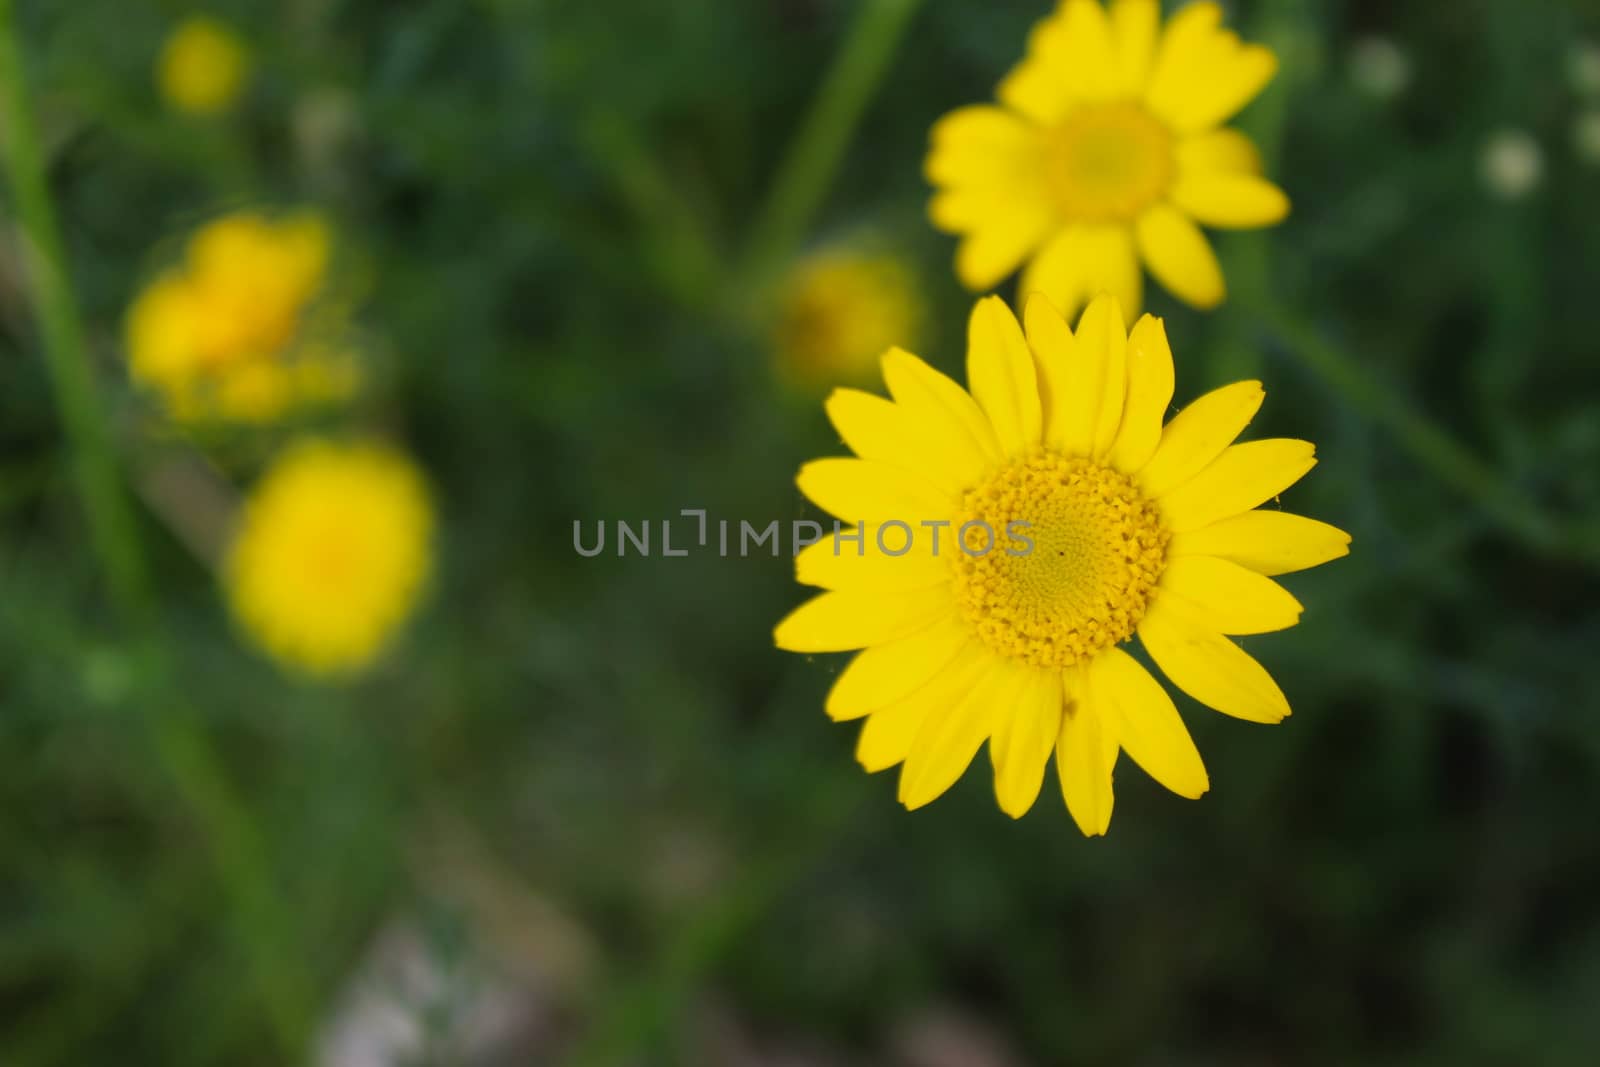 Great contrast of yellow daisy and green grass in the background. by mahirrov